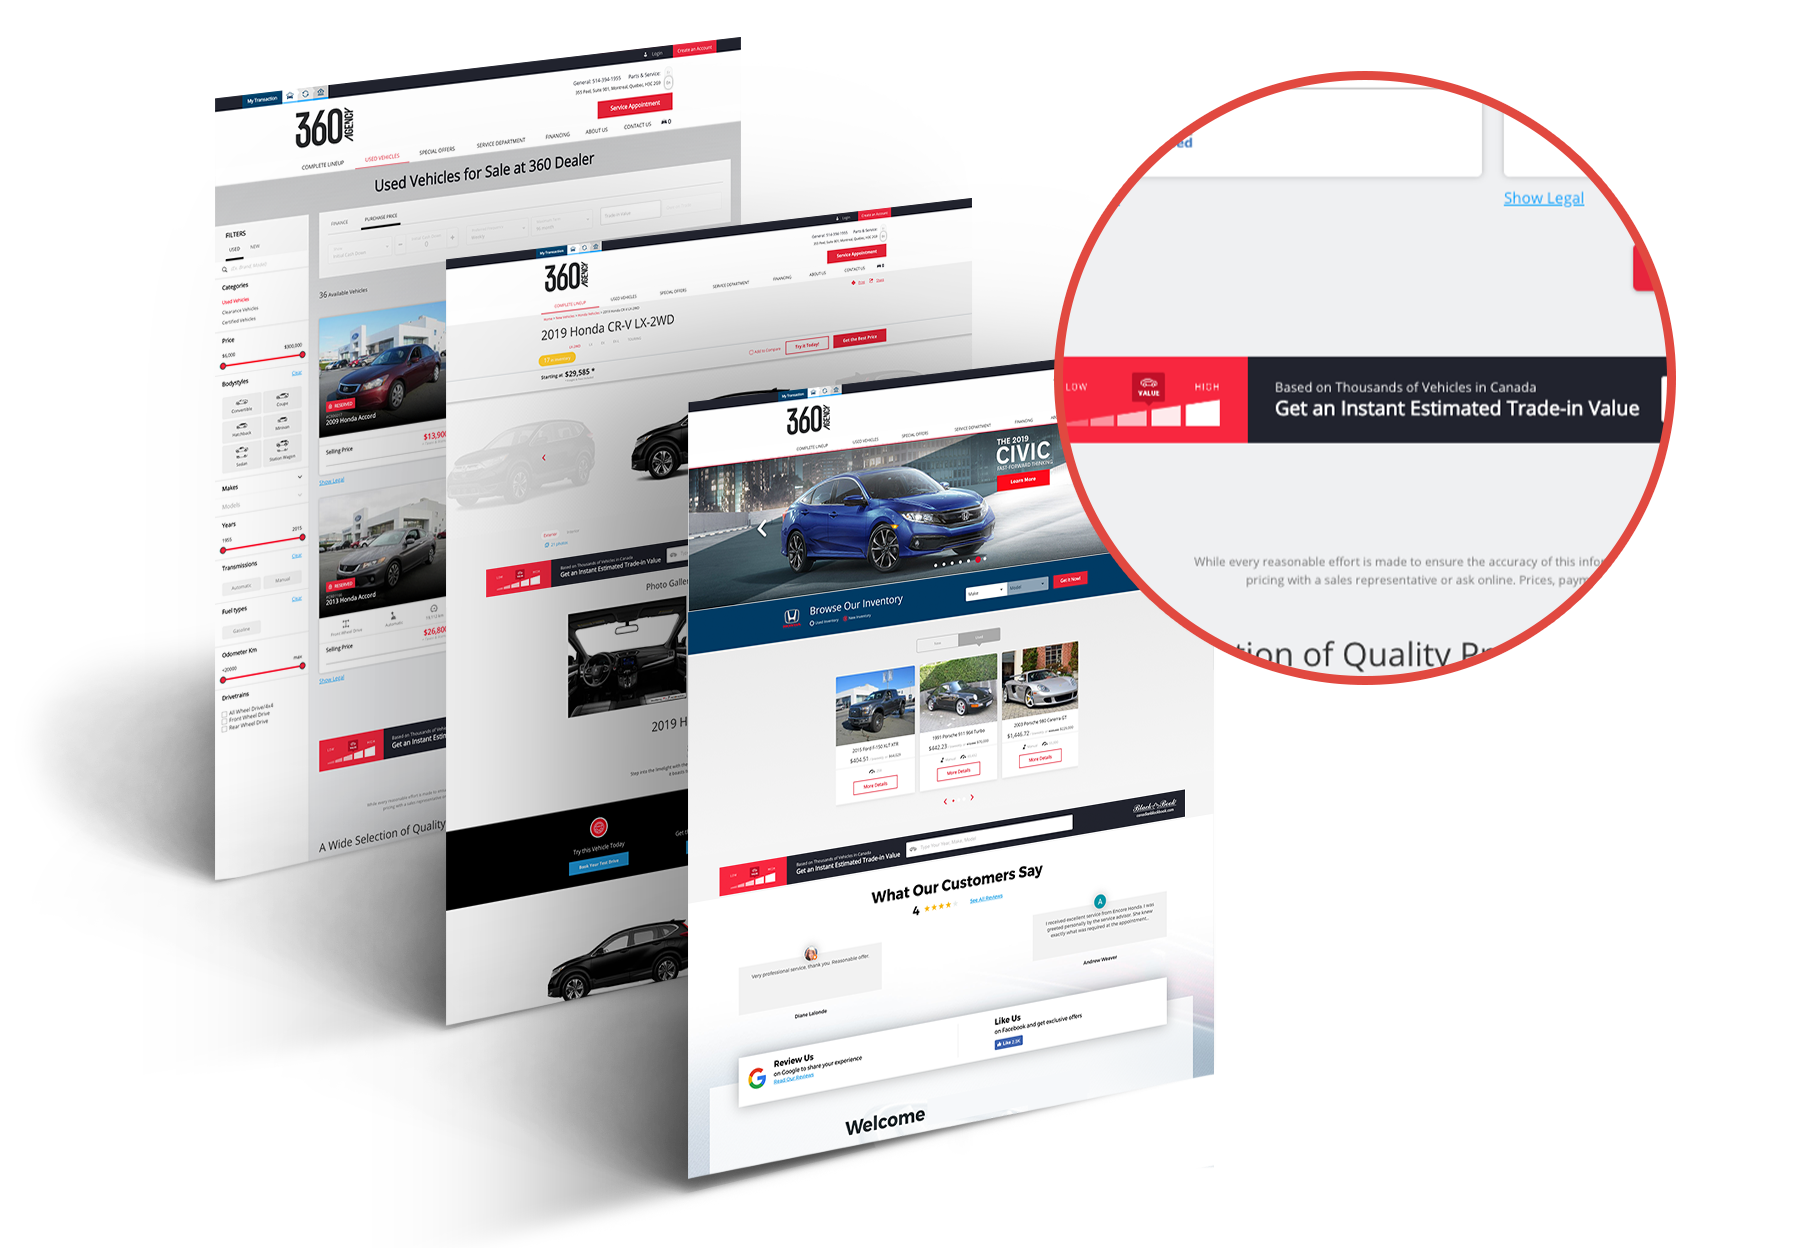 SHOWROOM 360 - Offer an instant estimate of trade-in value